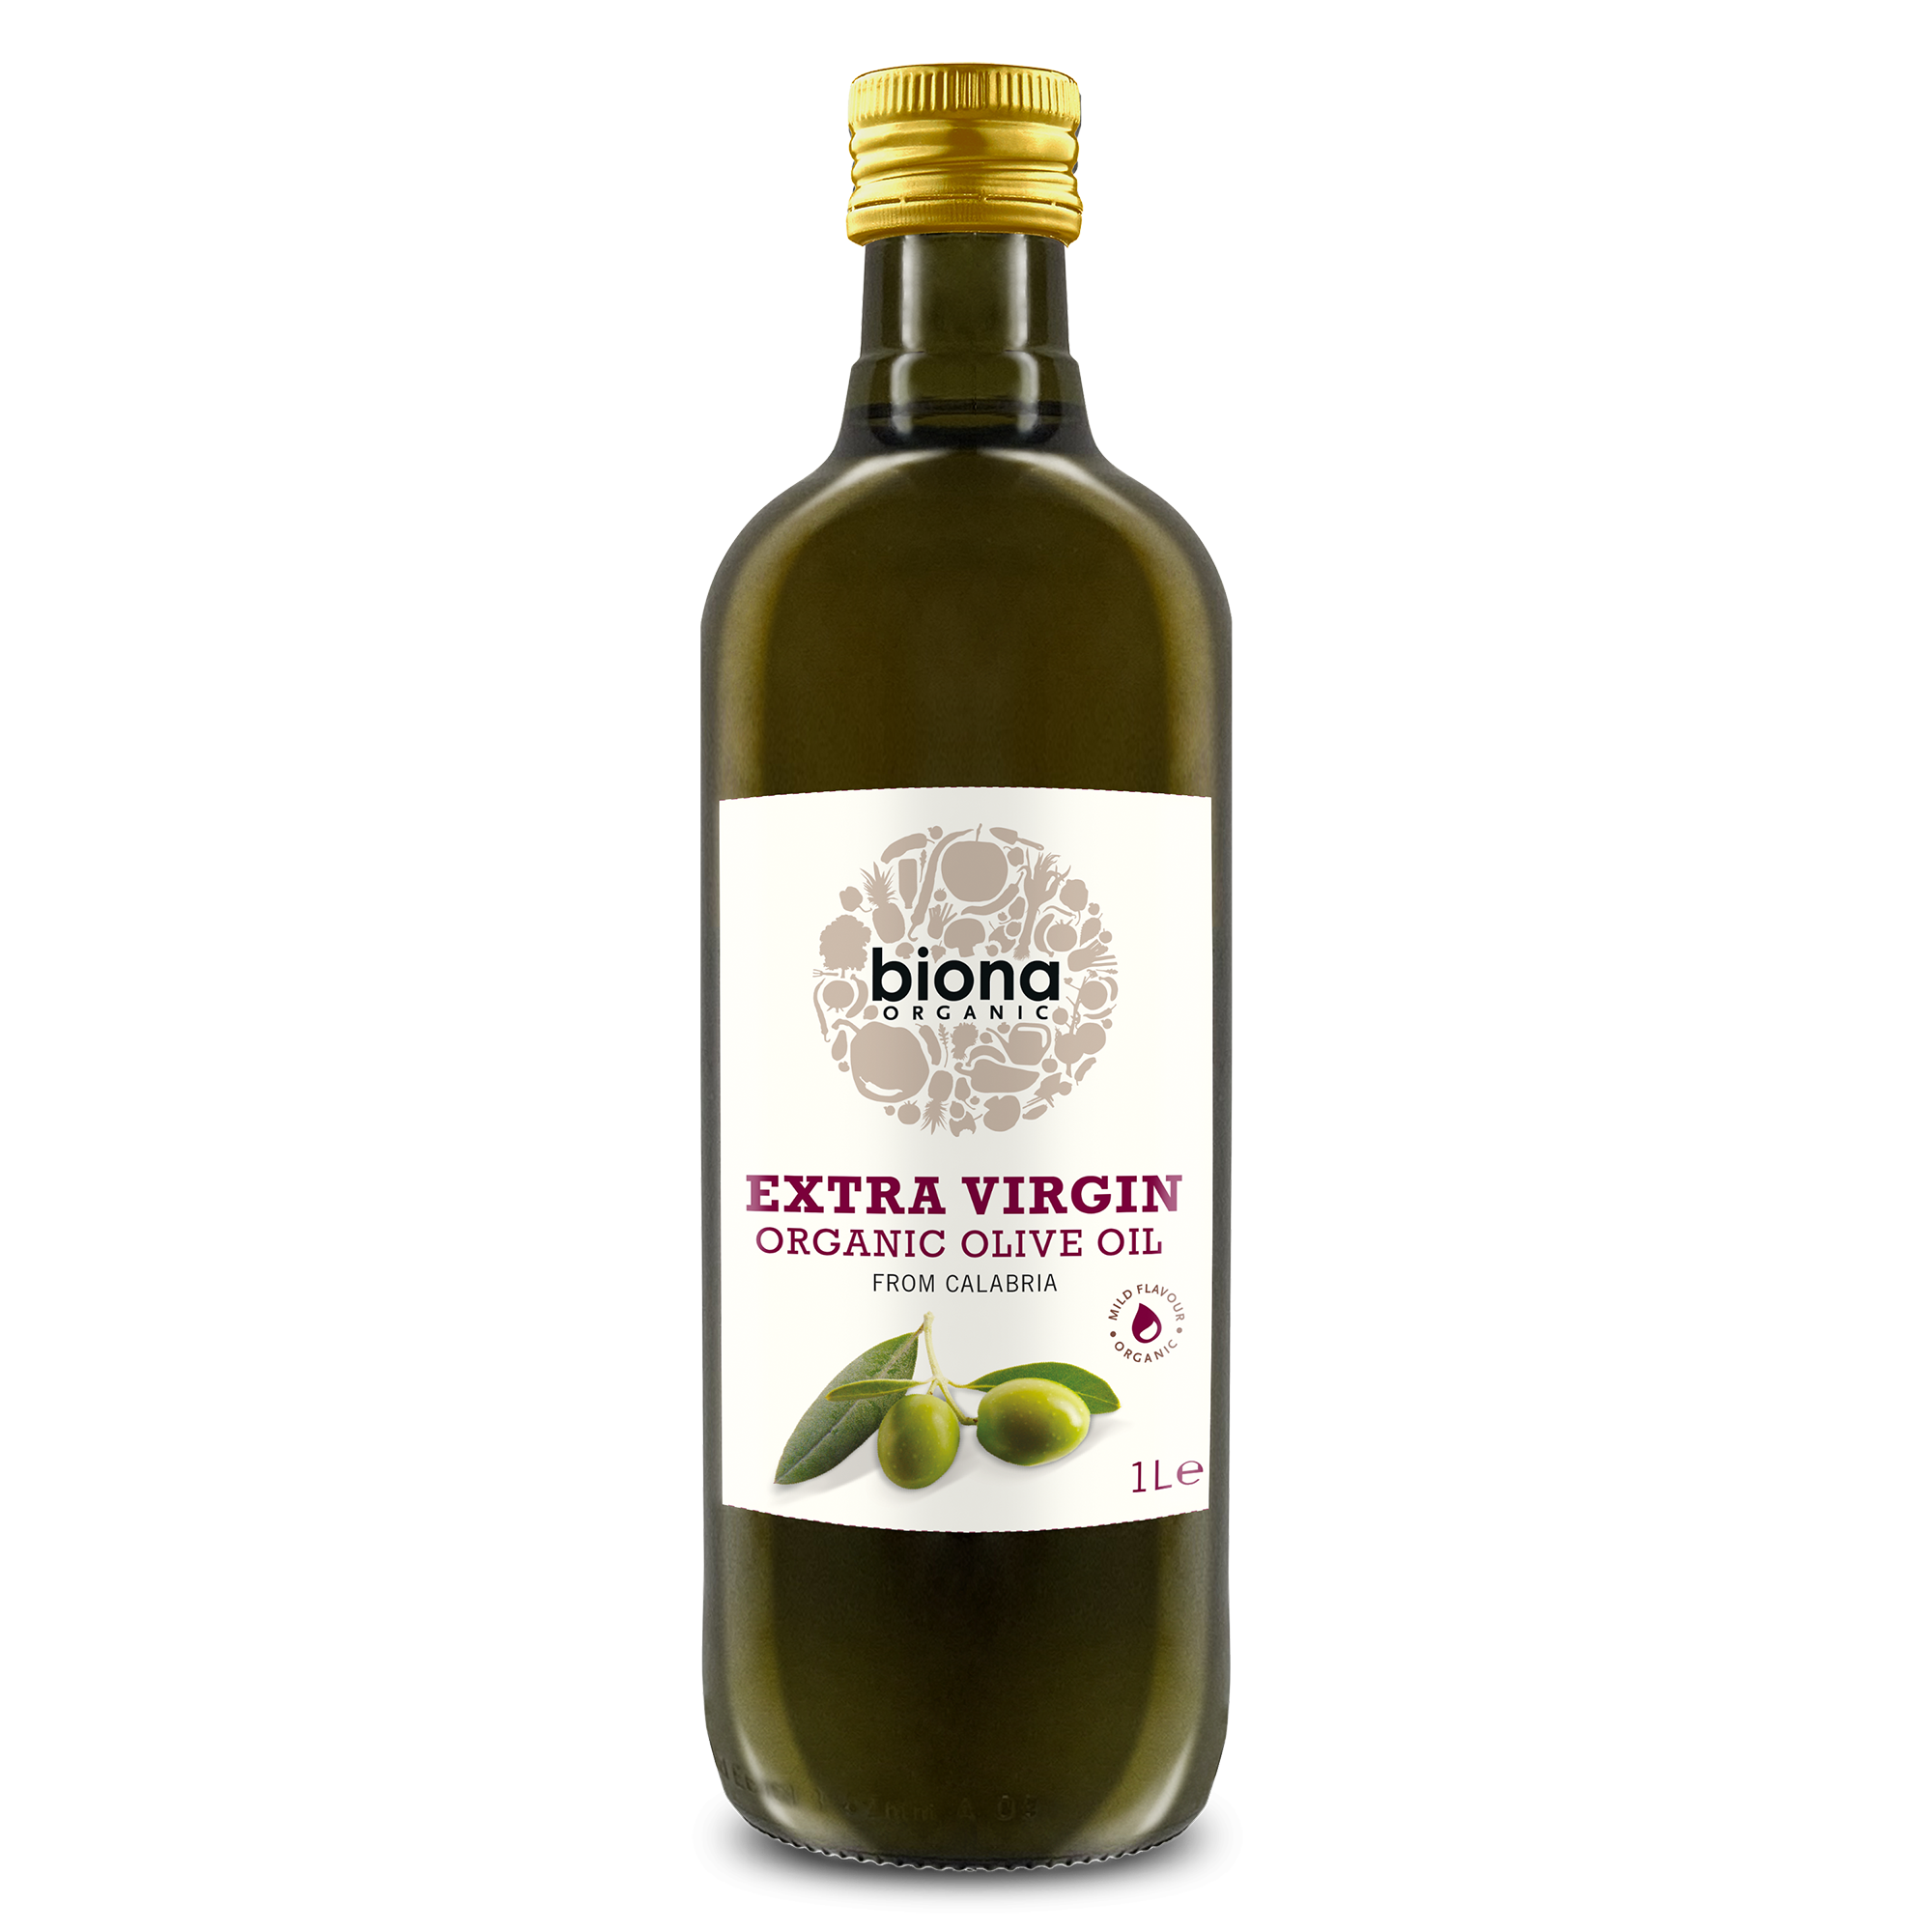 EXTRA VIRGIN OLIVE OIL FROM CALABRIA